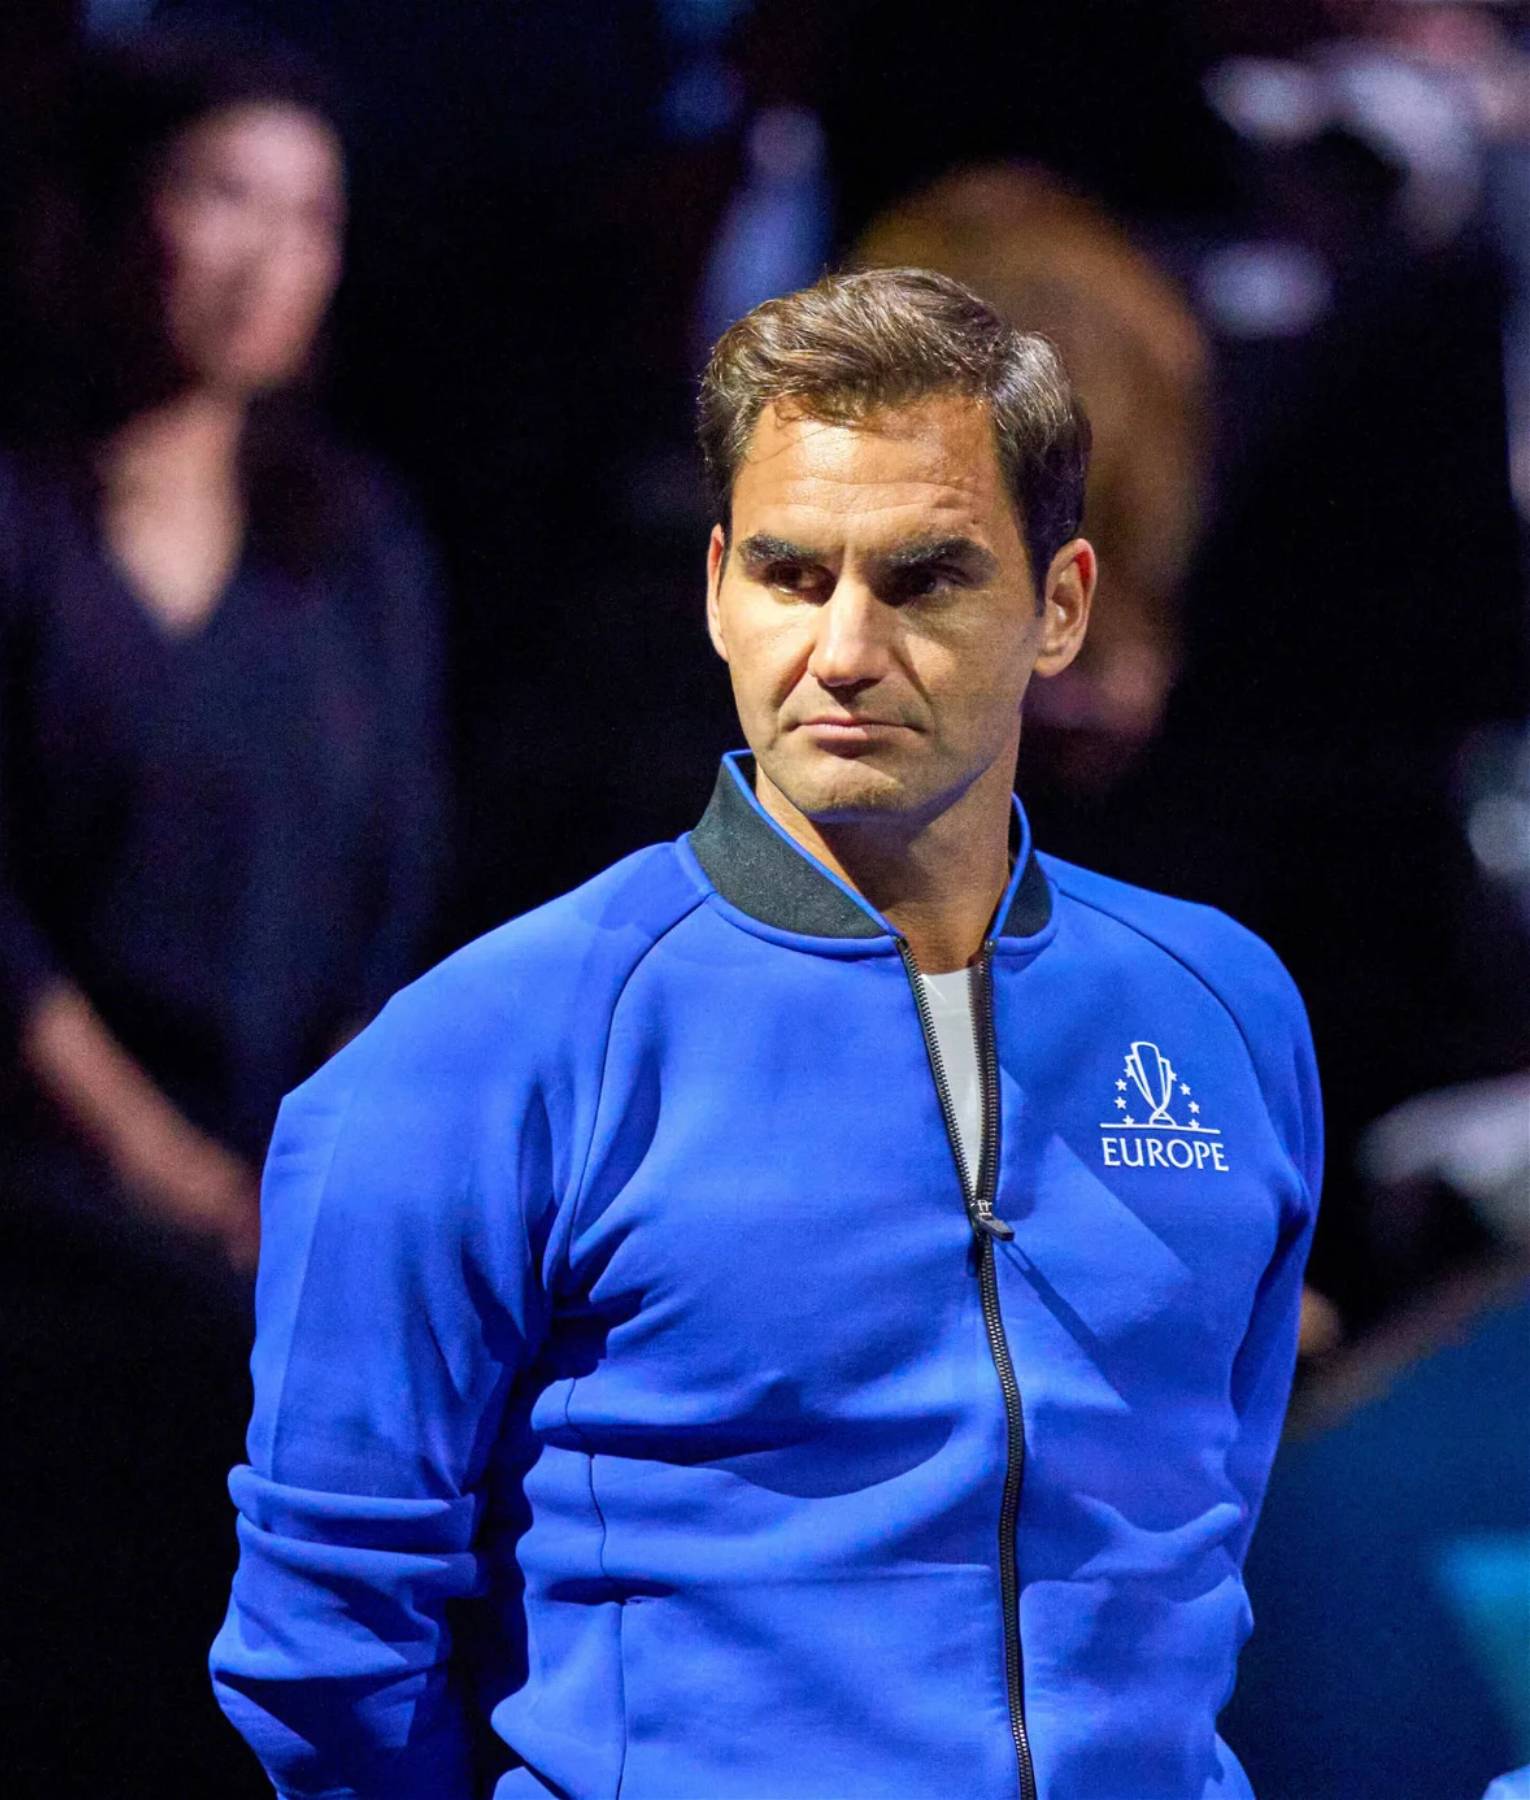 Europe Laver Cup Blue Jacket (5)